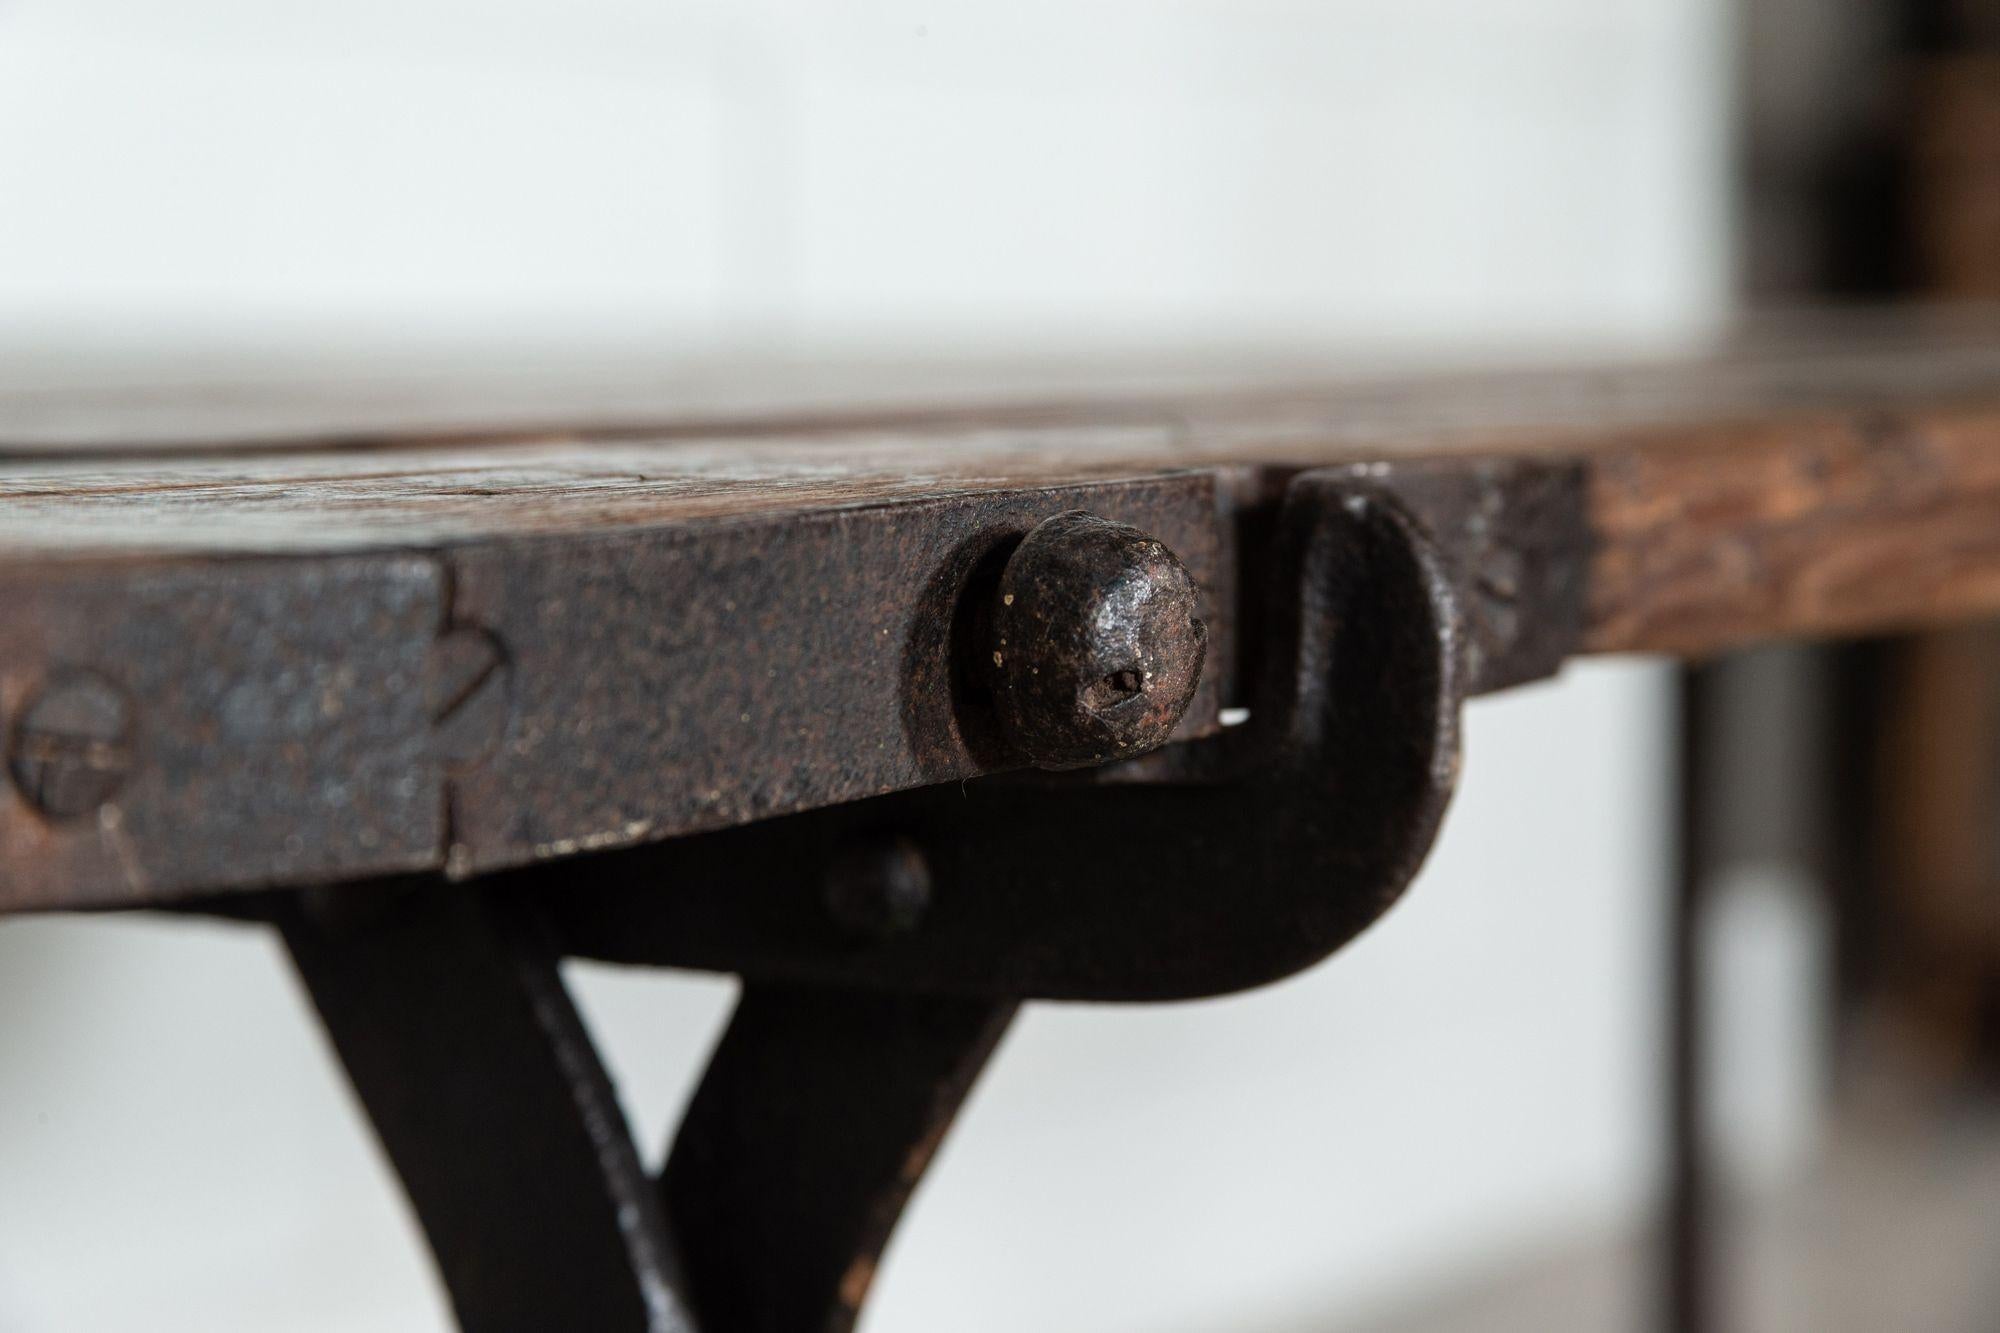 19th Century Iron & Pine Trestle Table For Sale 4